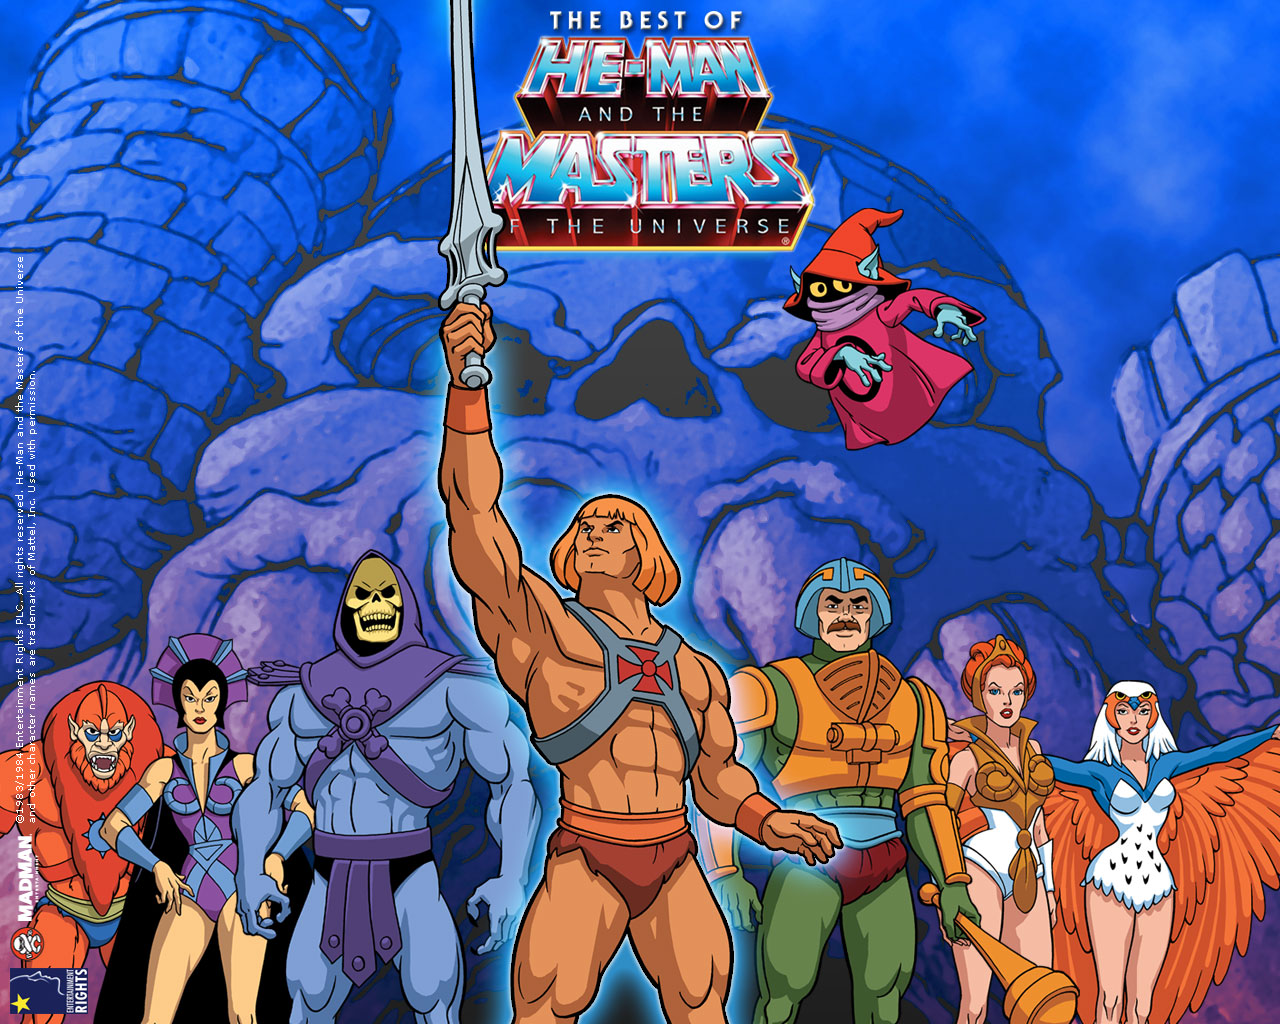 he-man and the masters of the universe Picture